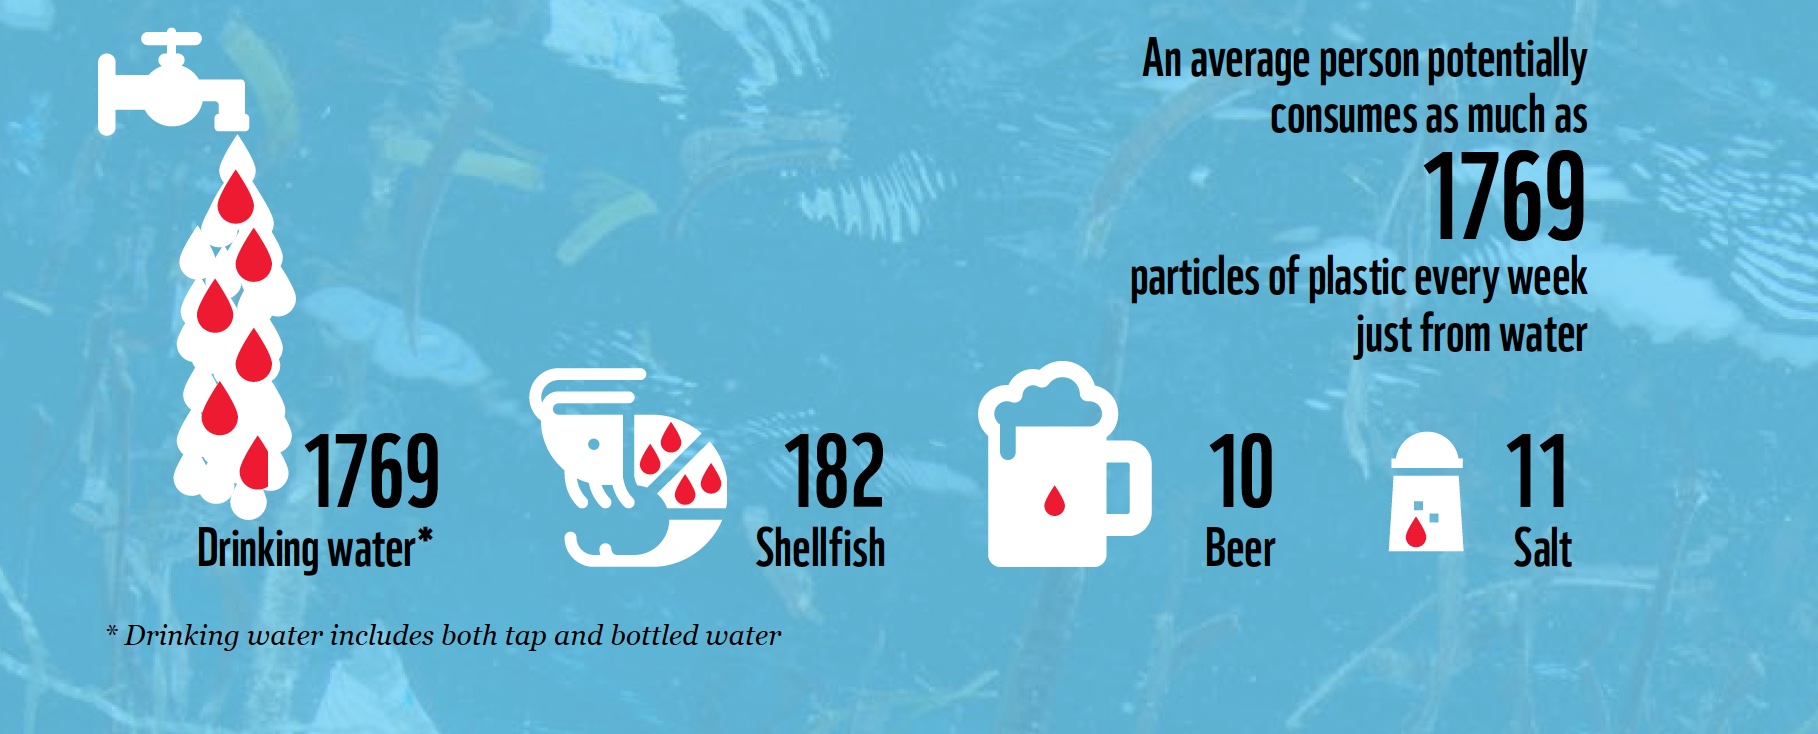 Estimated microplastics ingested through consumption of common foods and beverages per week